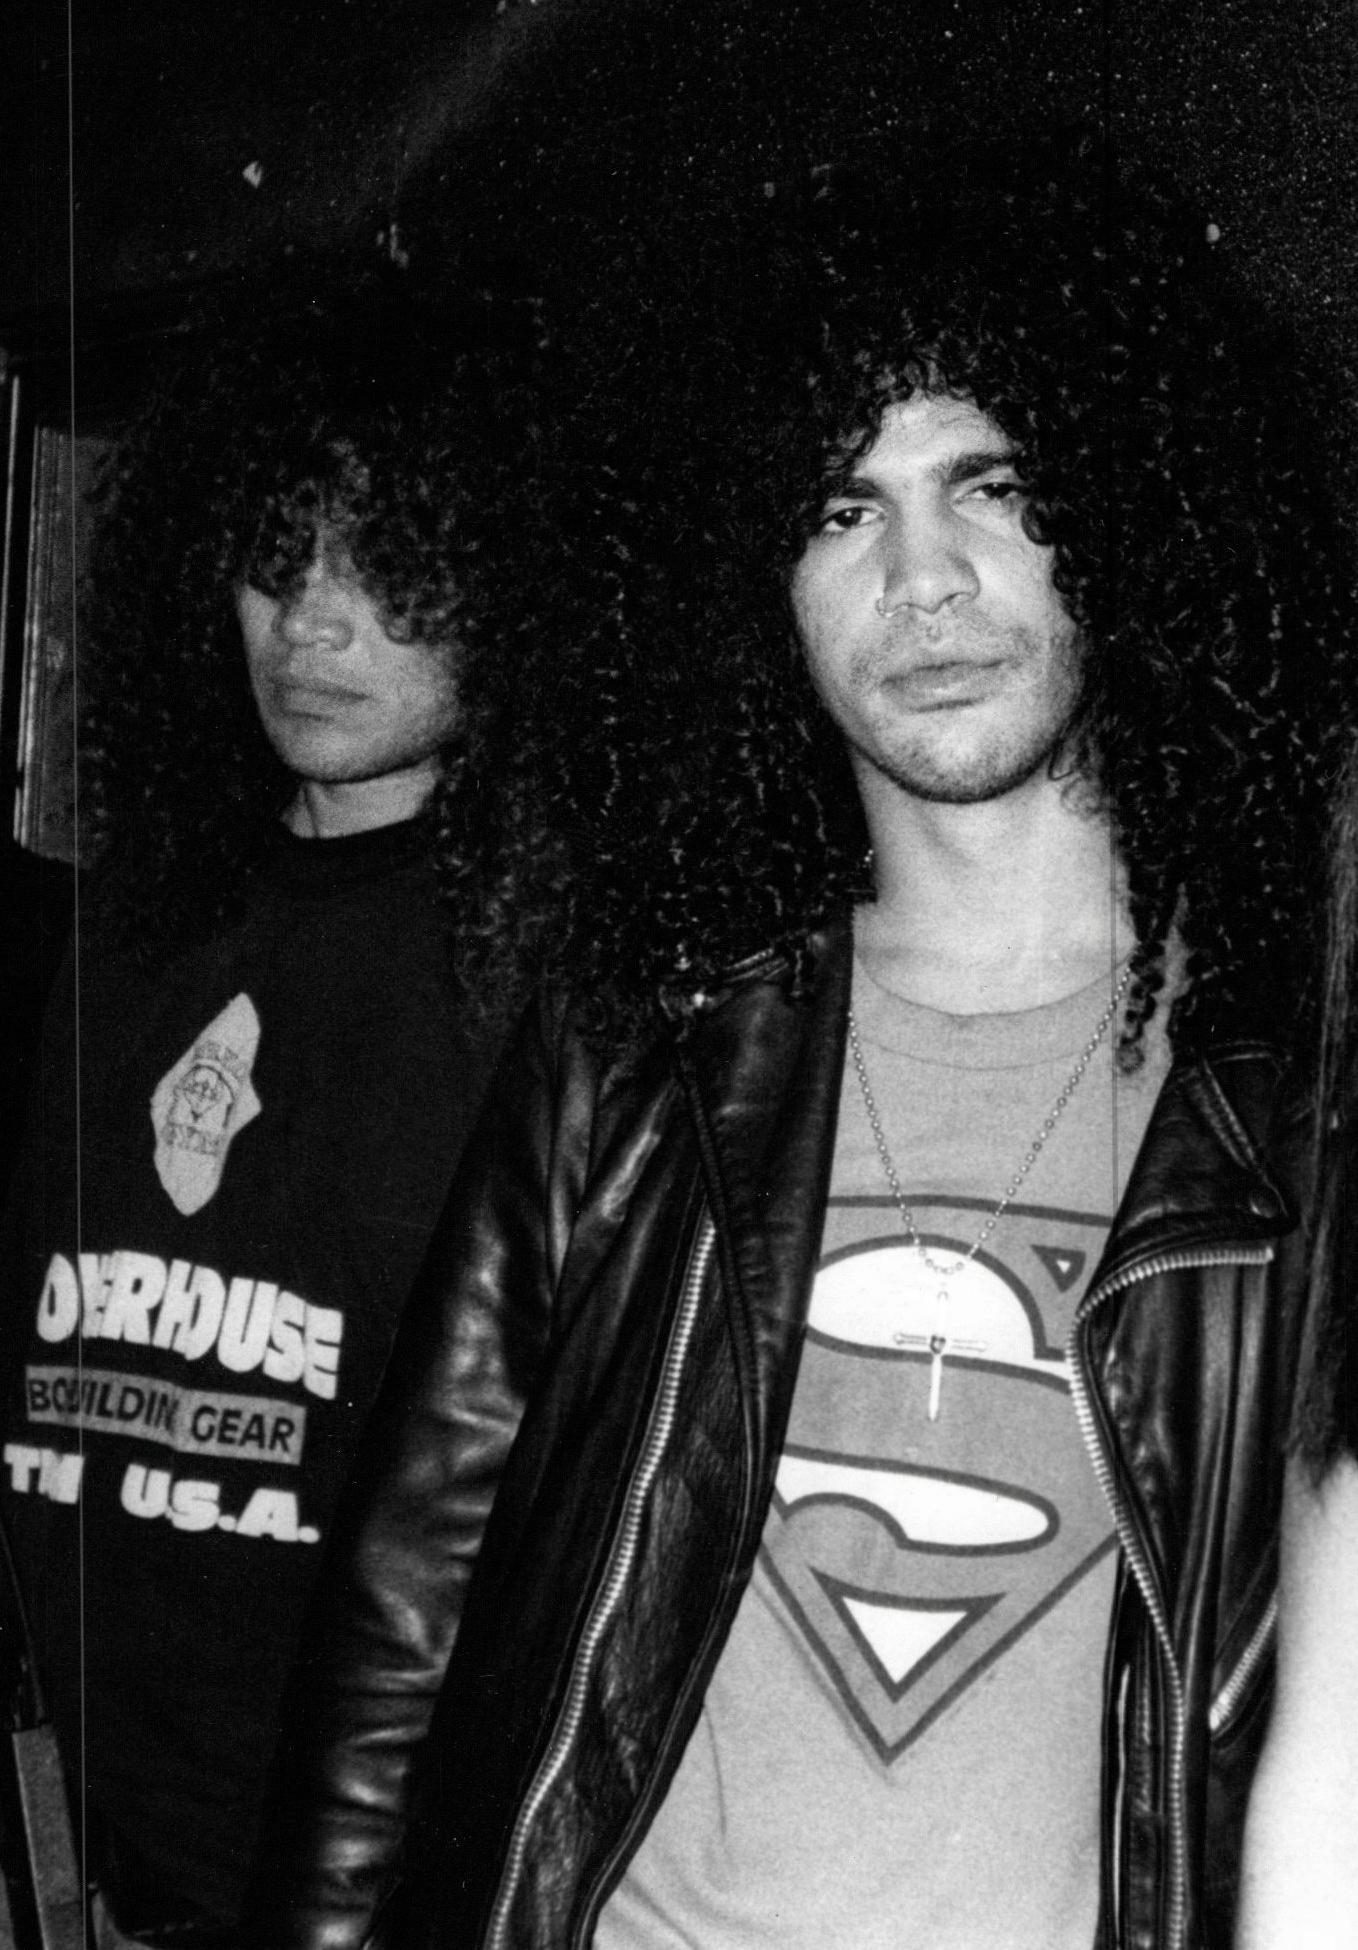 Unknown Black and White Photograph - Slash of Guns N' Roses with Brother Ash Hudson Vintage Original Photograph